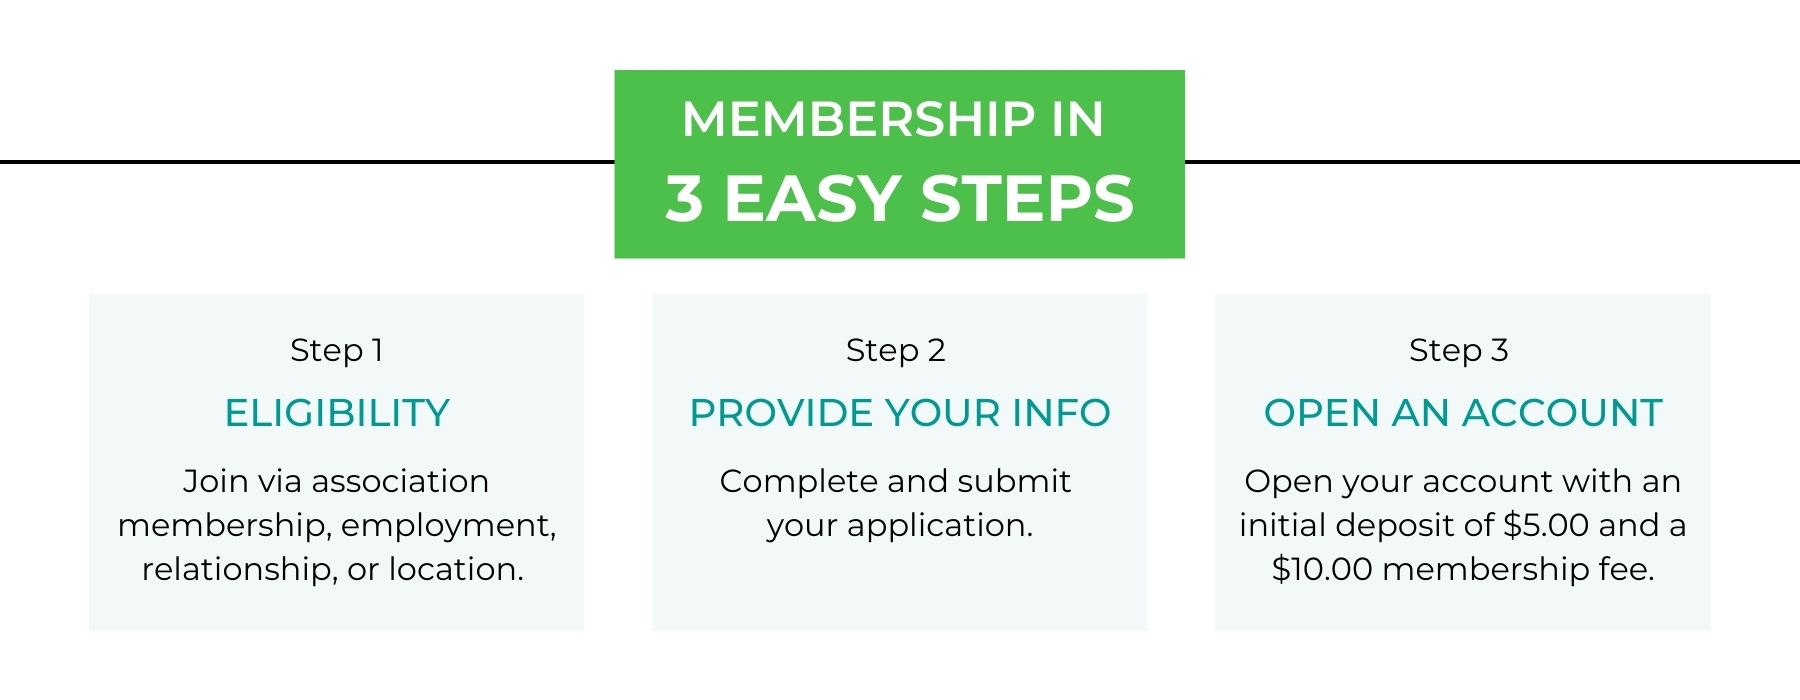 Membership in 3 east steps! Check eligibility, provide your info, then open an account!